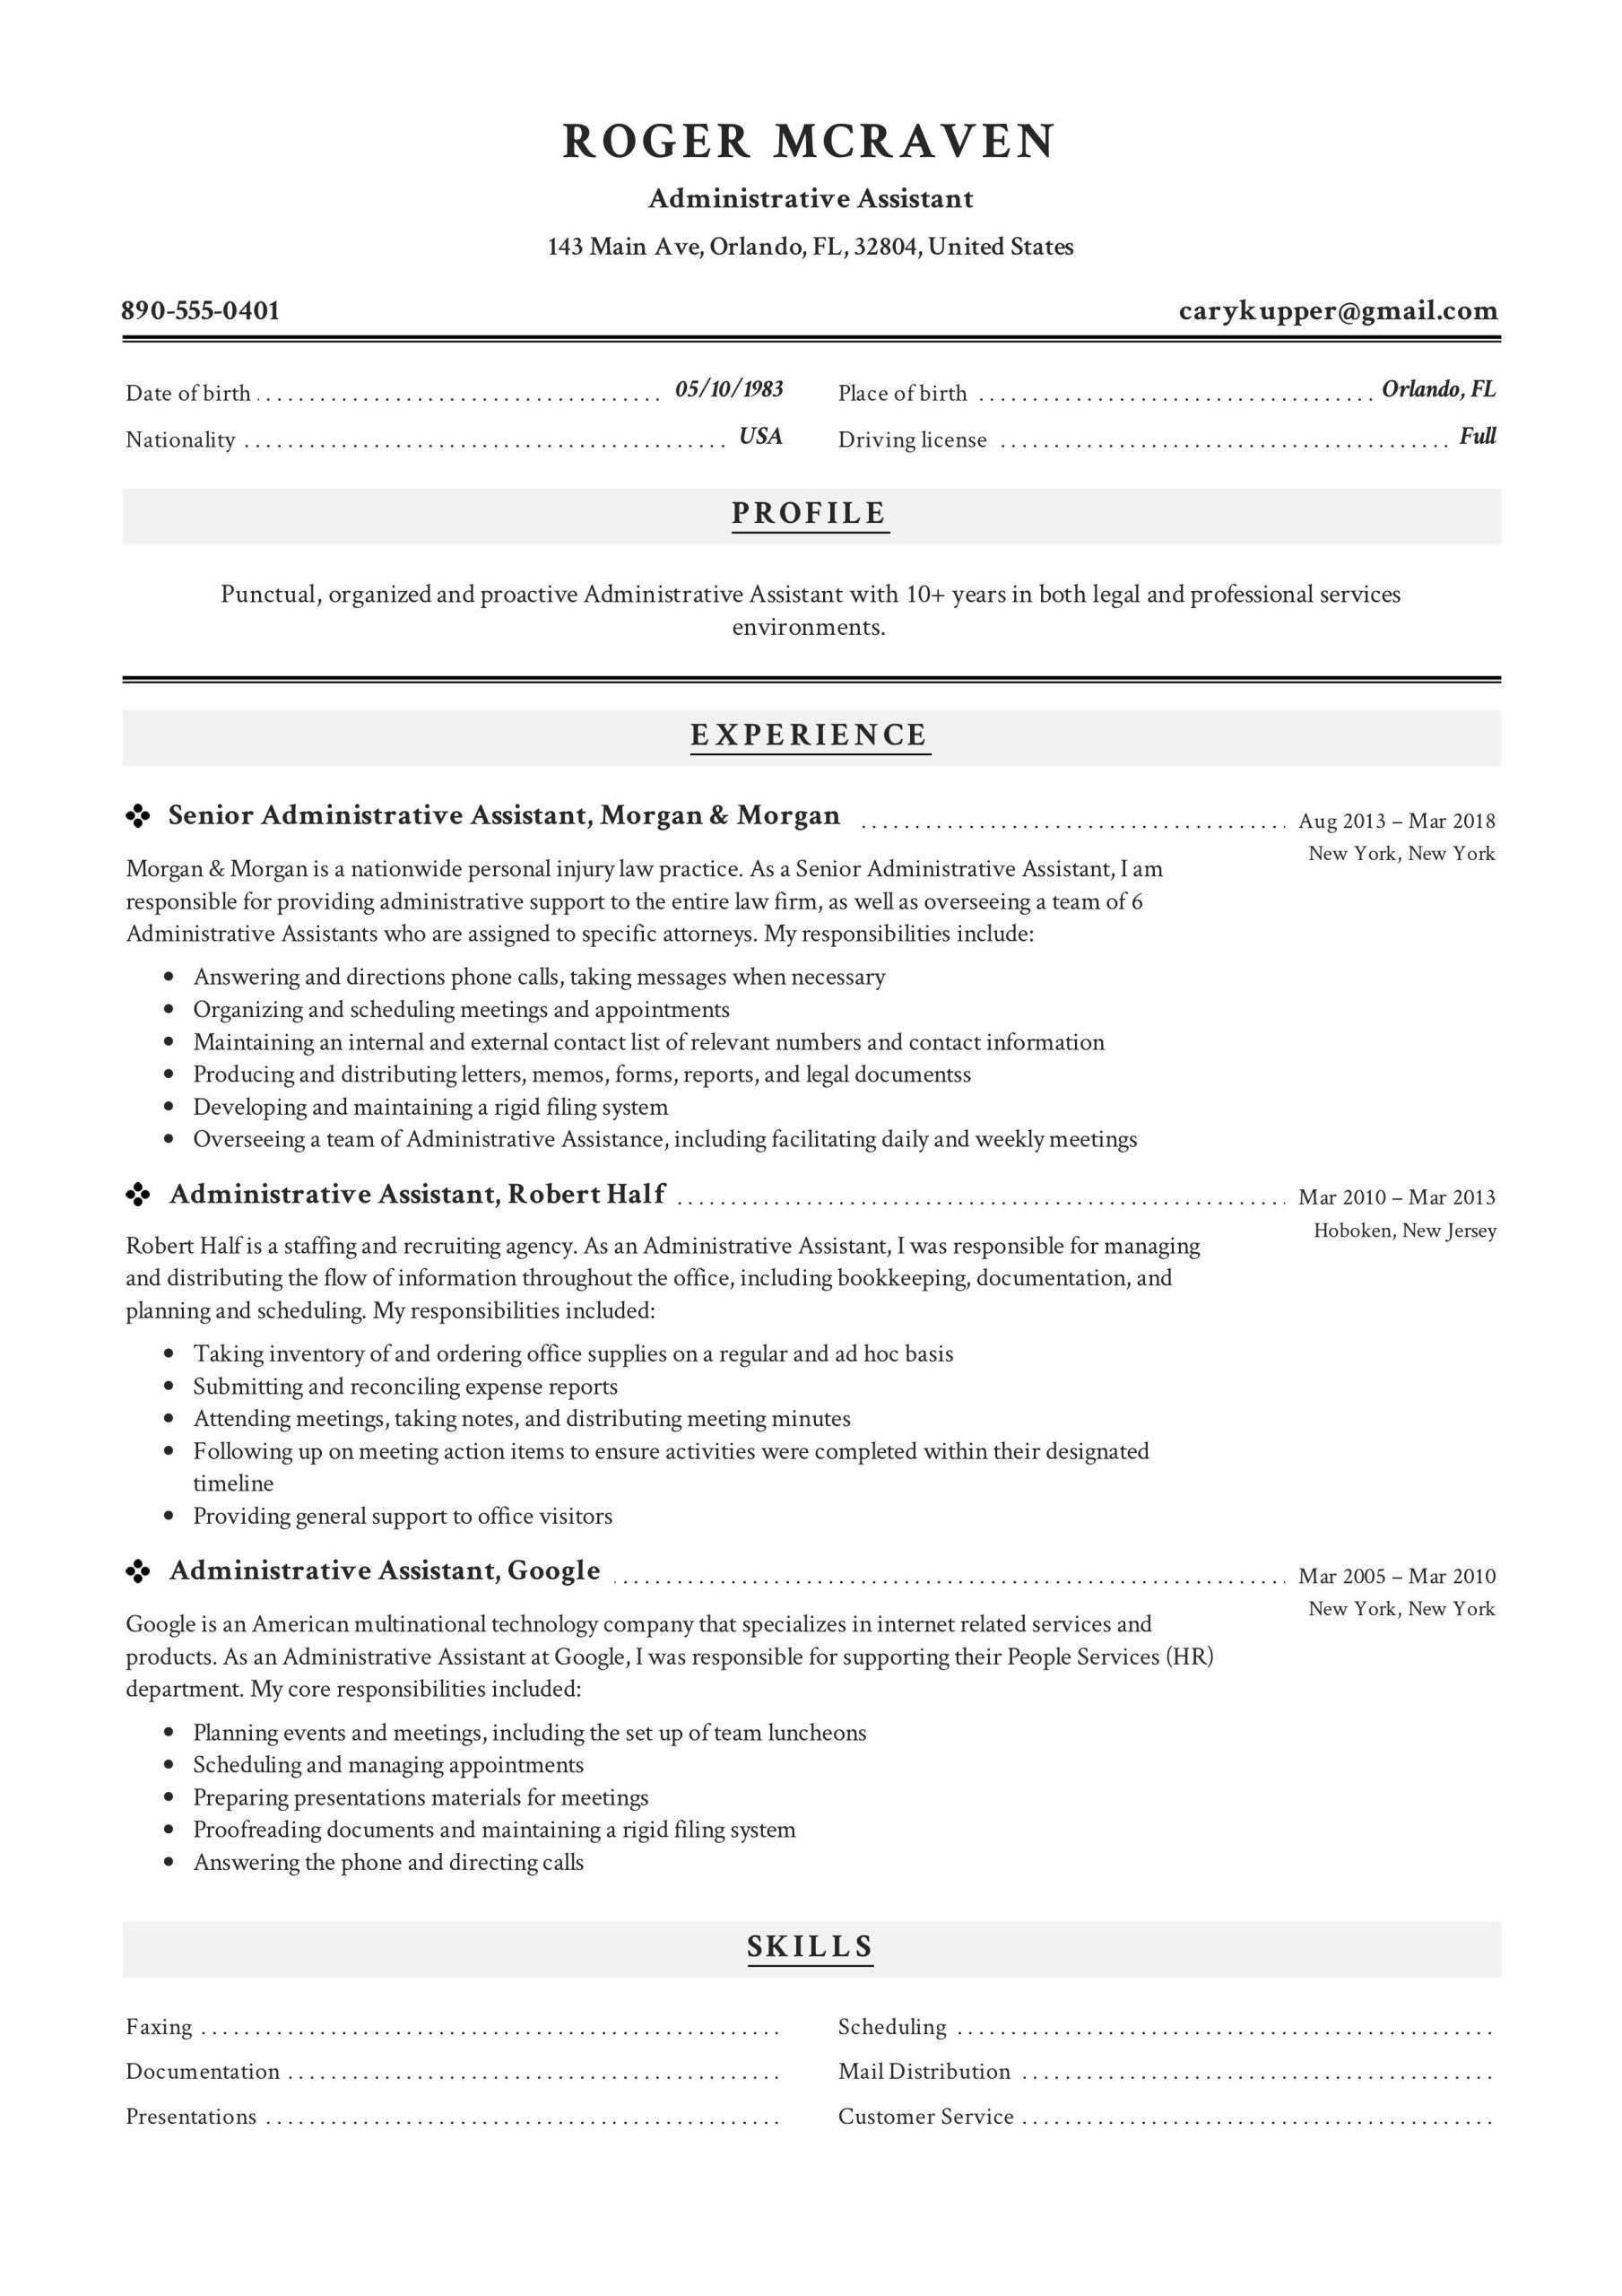 General Office Administrator Resume Free Sample Free Administrative assistant Resume Sample, Template, Example, Cv …